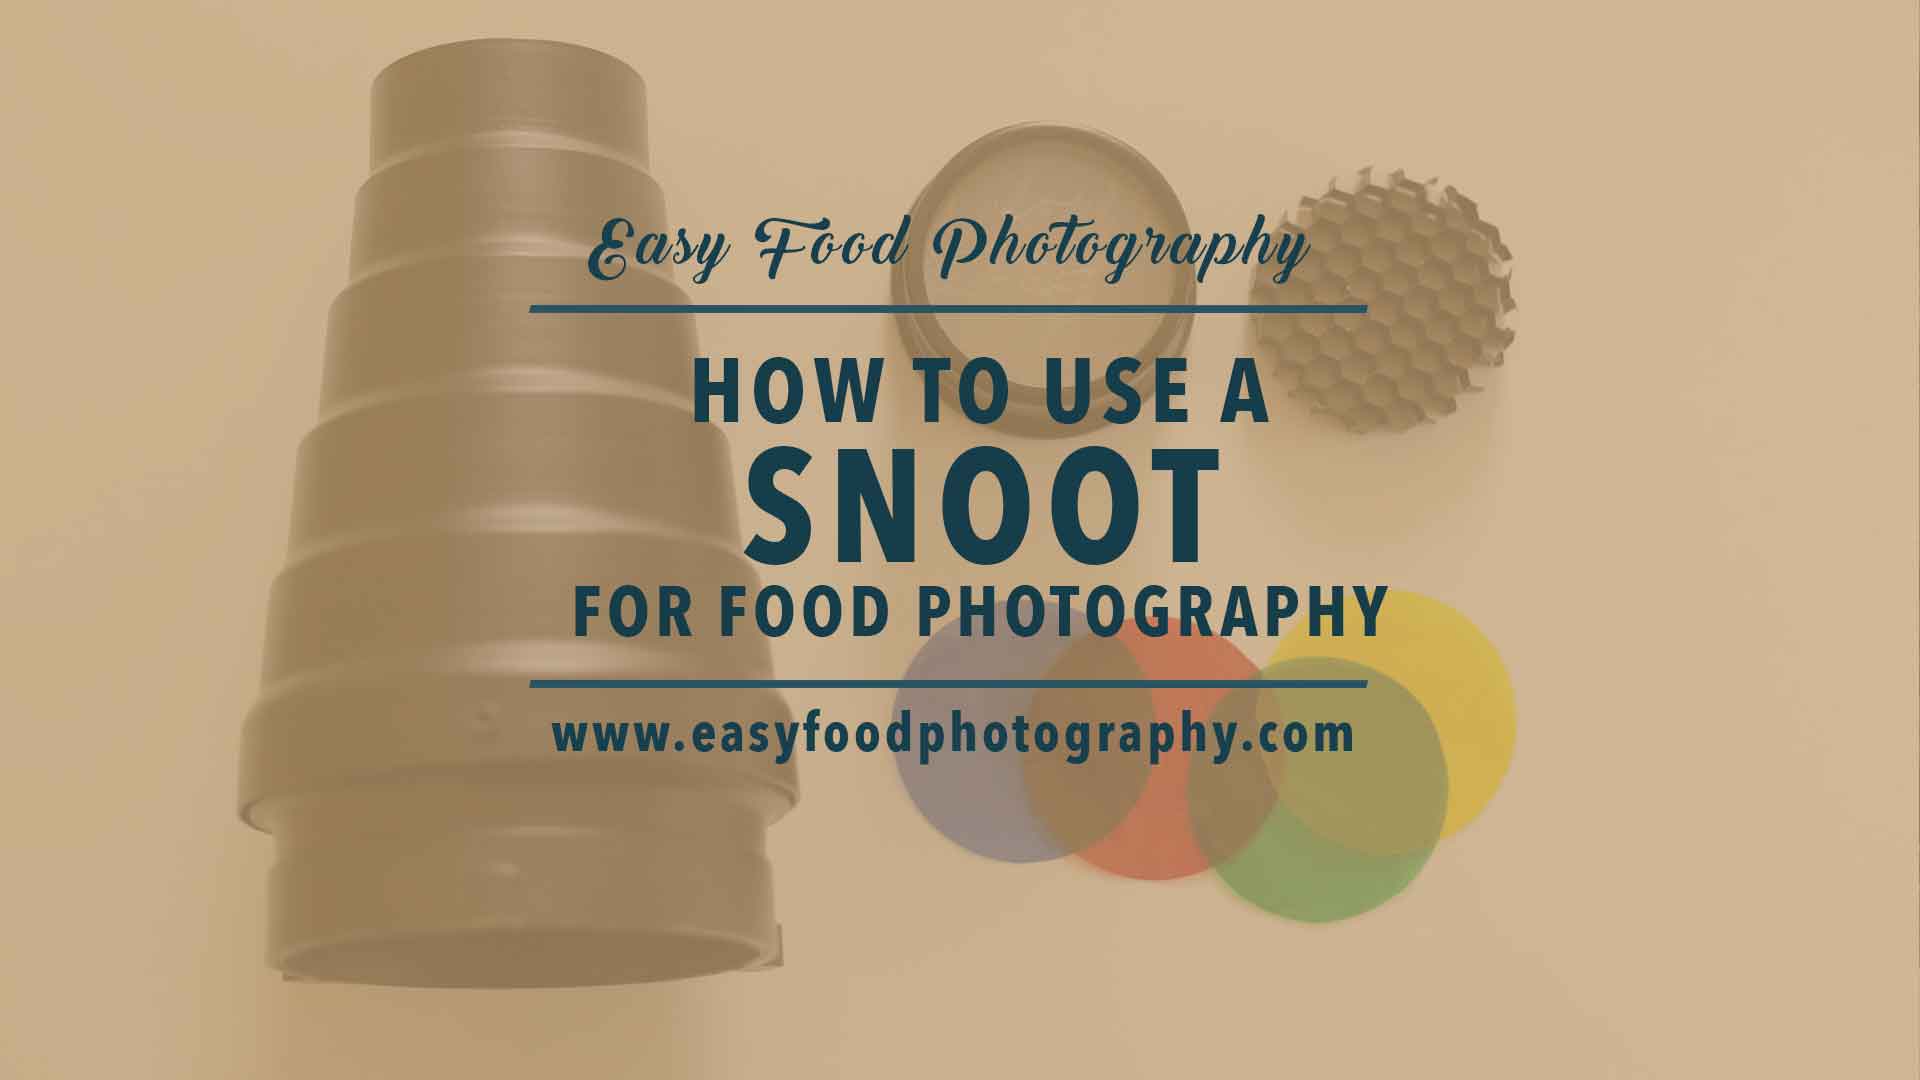 How to use a snoot for food photography